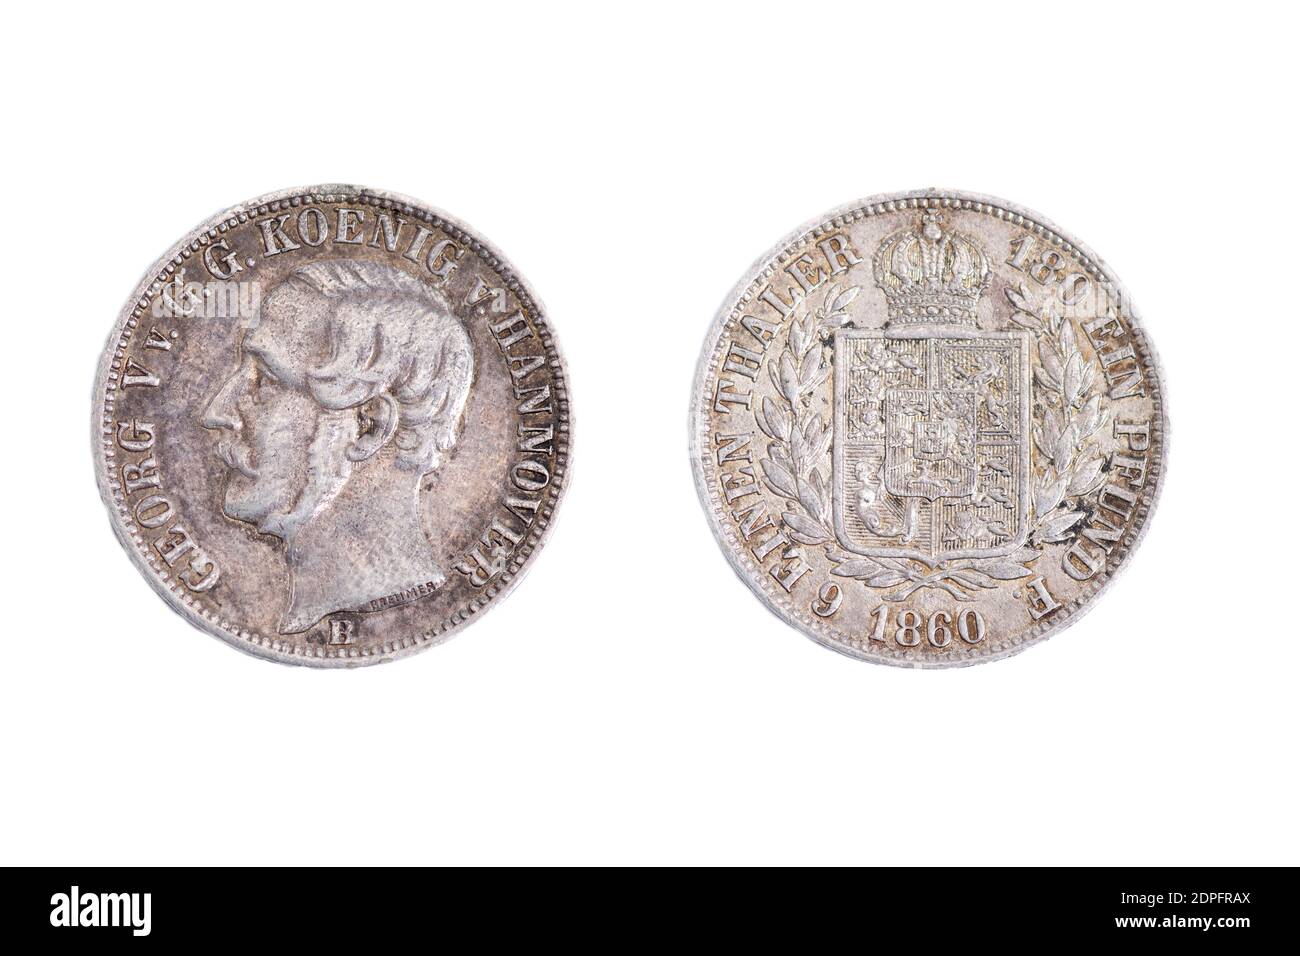 Ancient old vintage coin coins money King George the V of Hanover Hannover Germany German 1860 silver Thaler Stock Photo